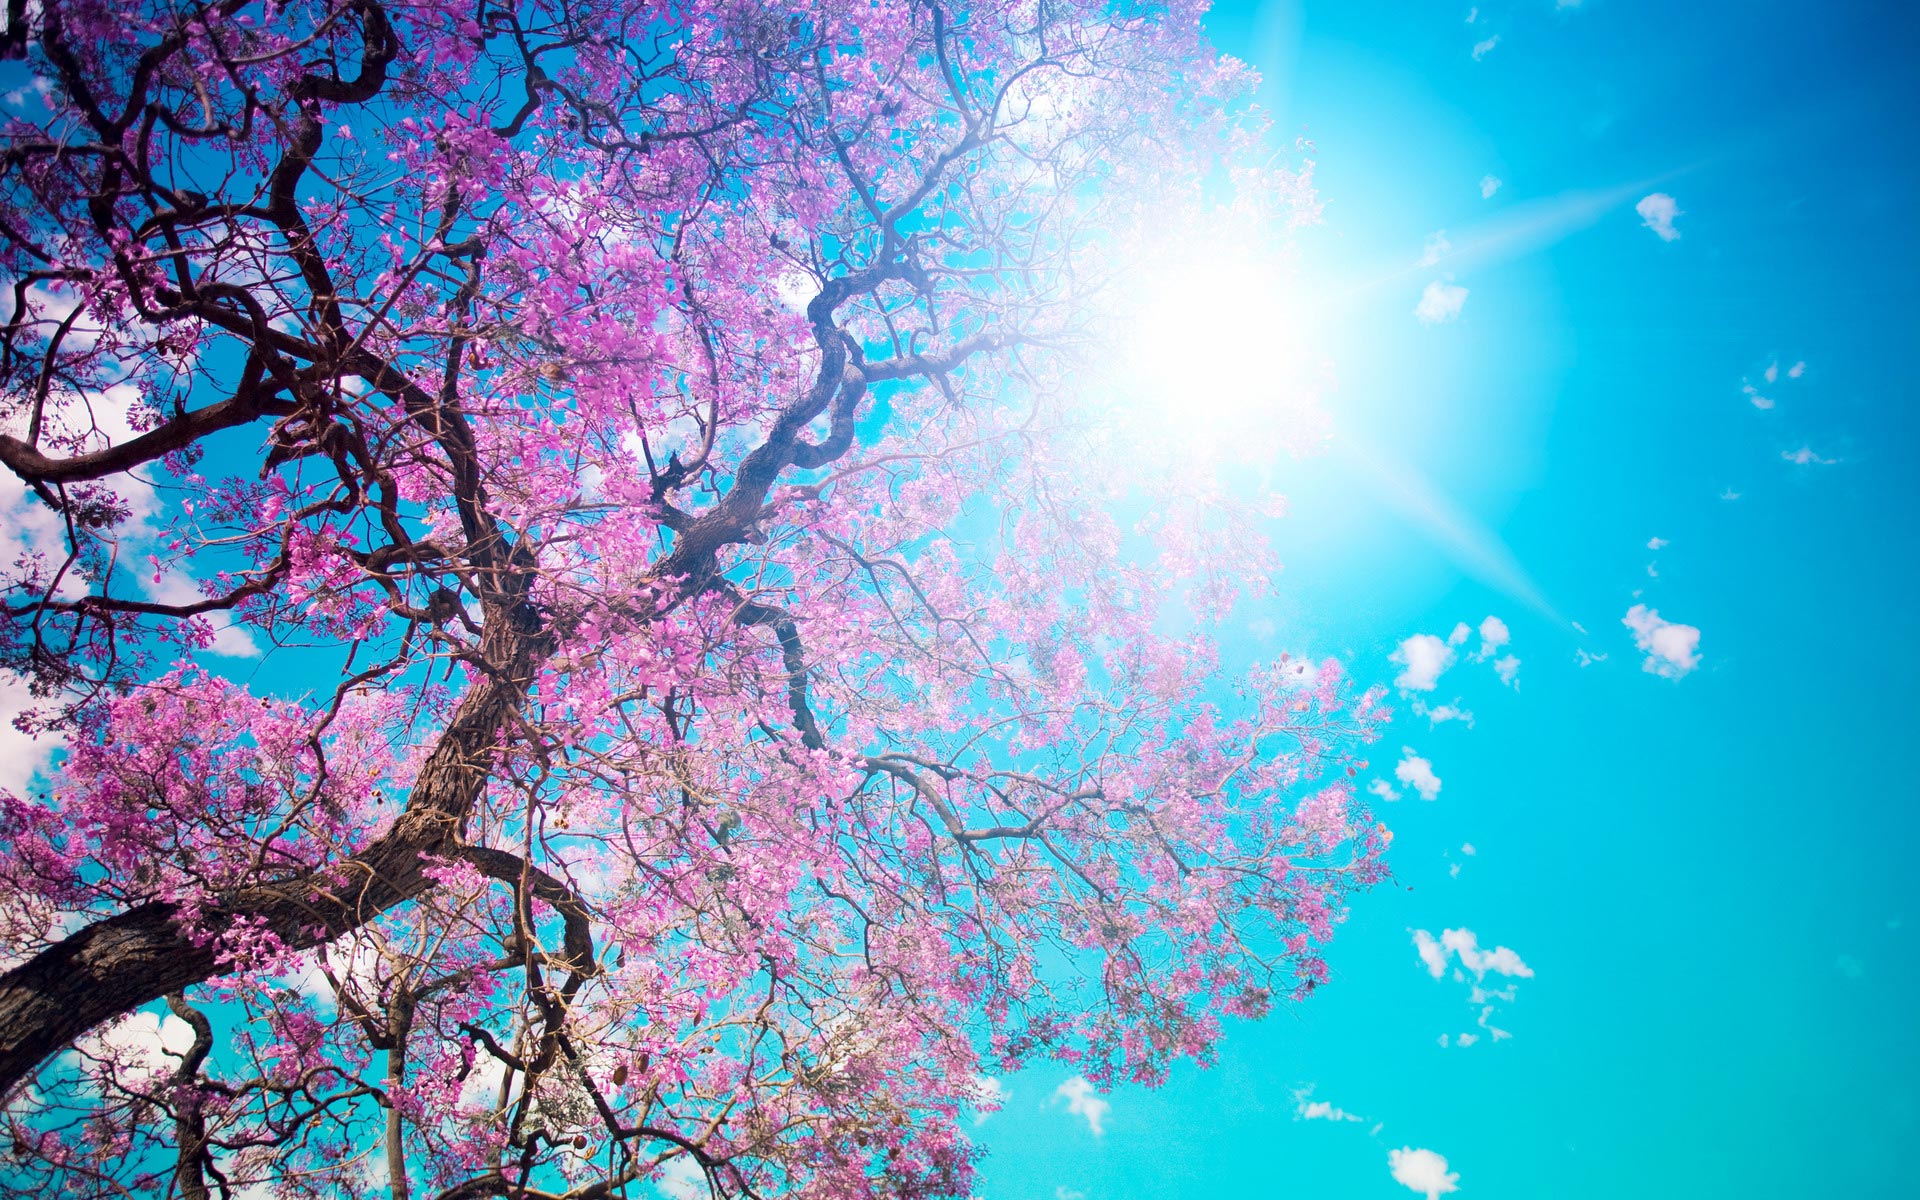 Scenery Wallpaper Includes The Scene Of Blooming Spring